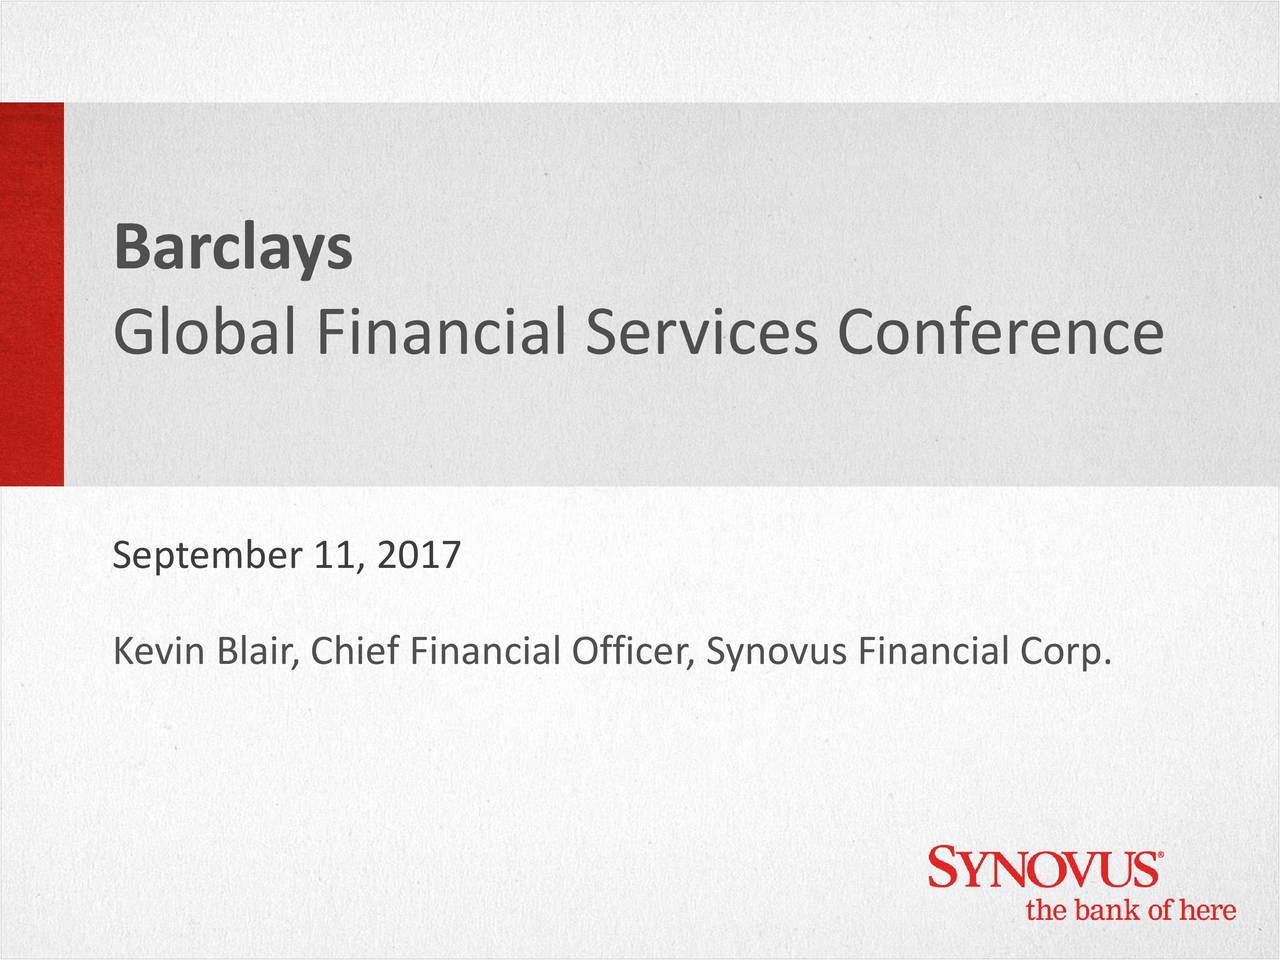 Barclays Global Financial Services Conference (NYSE:SNV) | Seeking Alpha